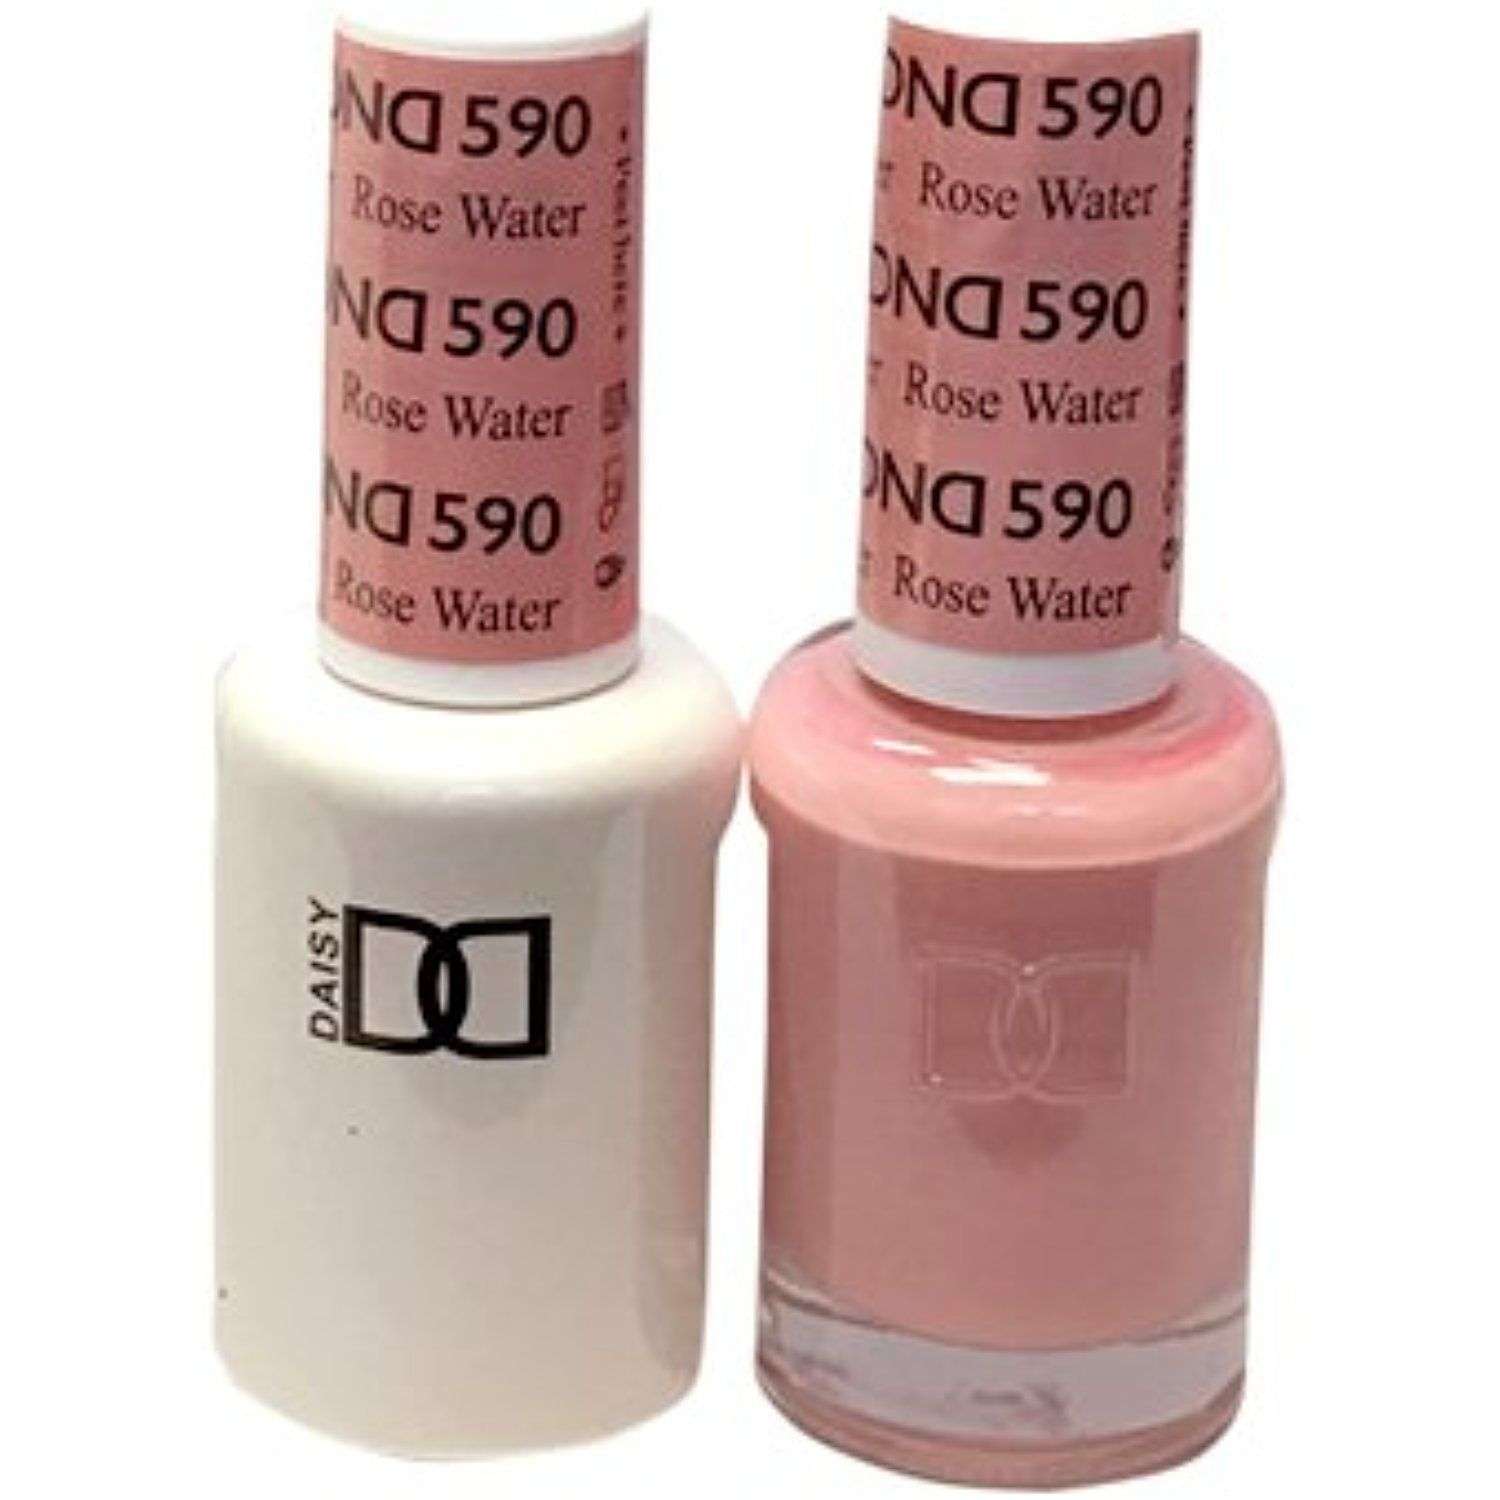 DND Gel Polish Rose Water 590 ** You can find more details ...